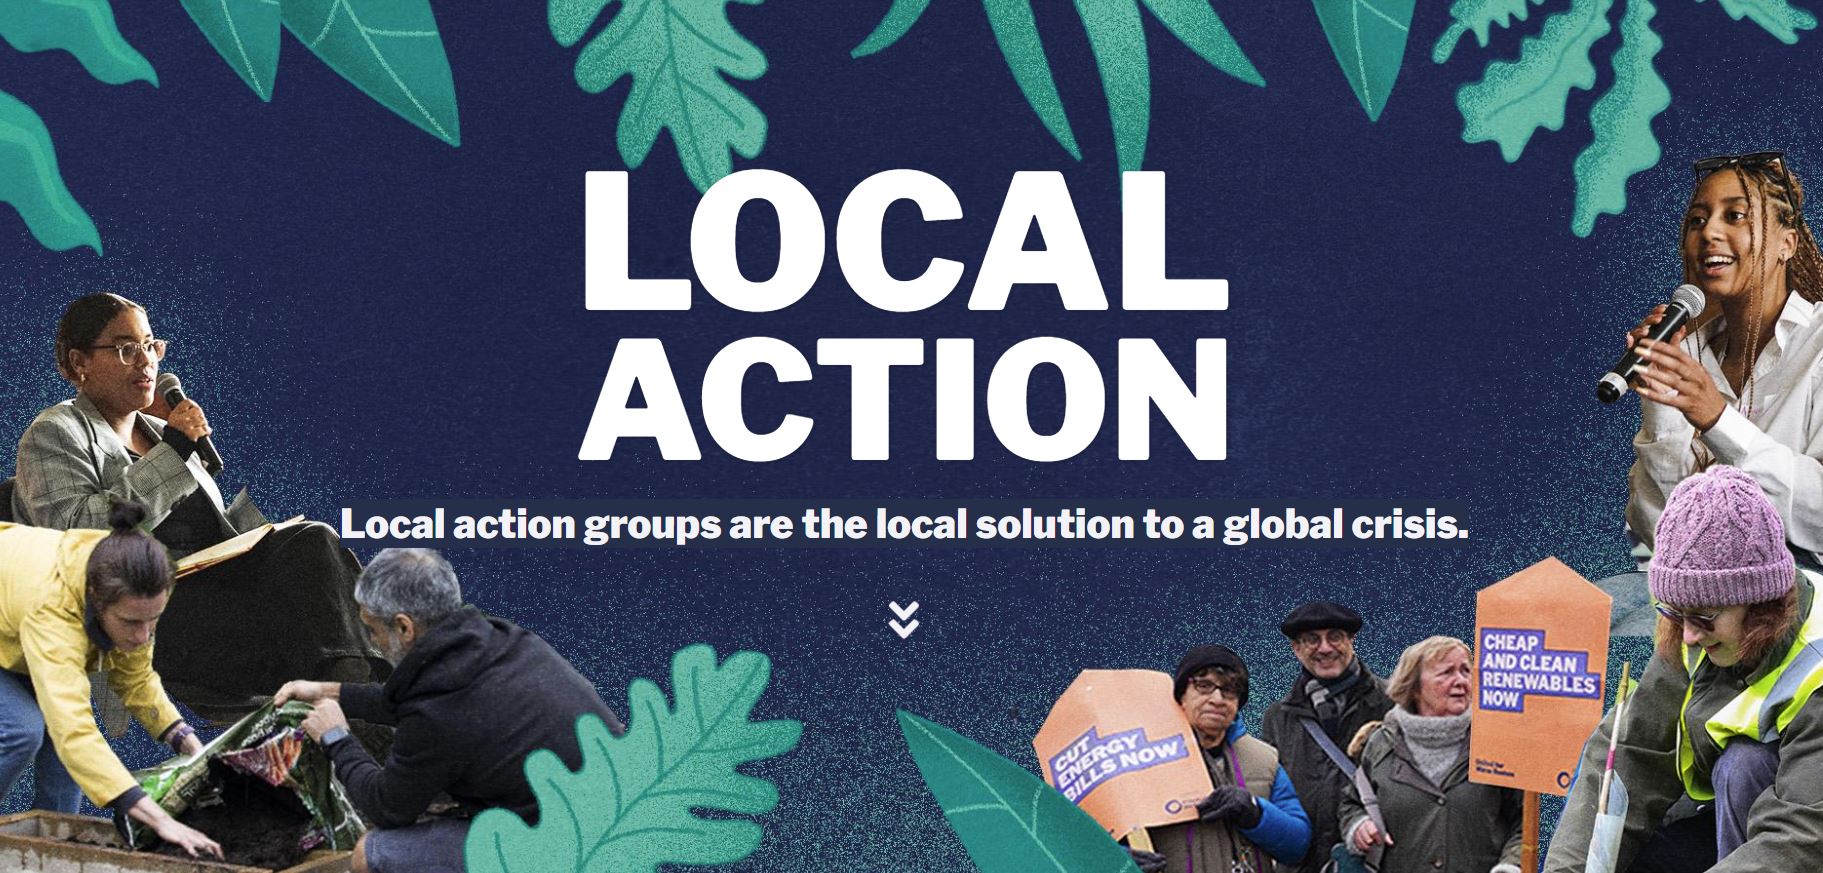 "Local action"